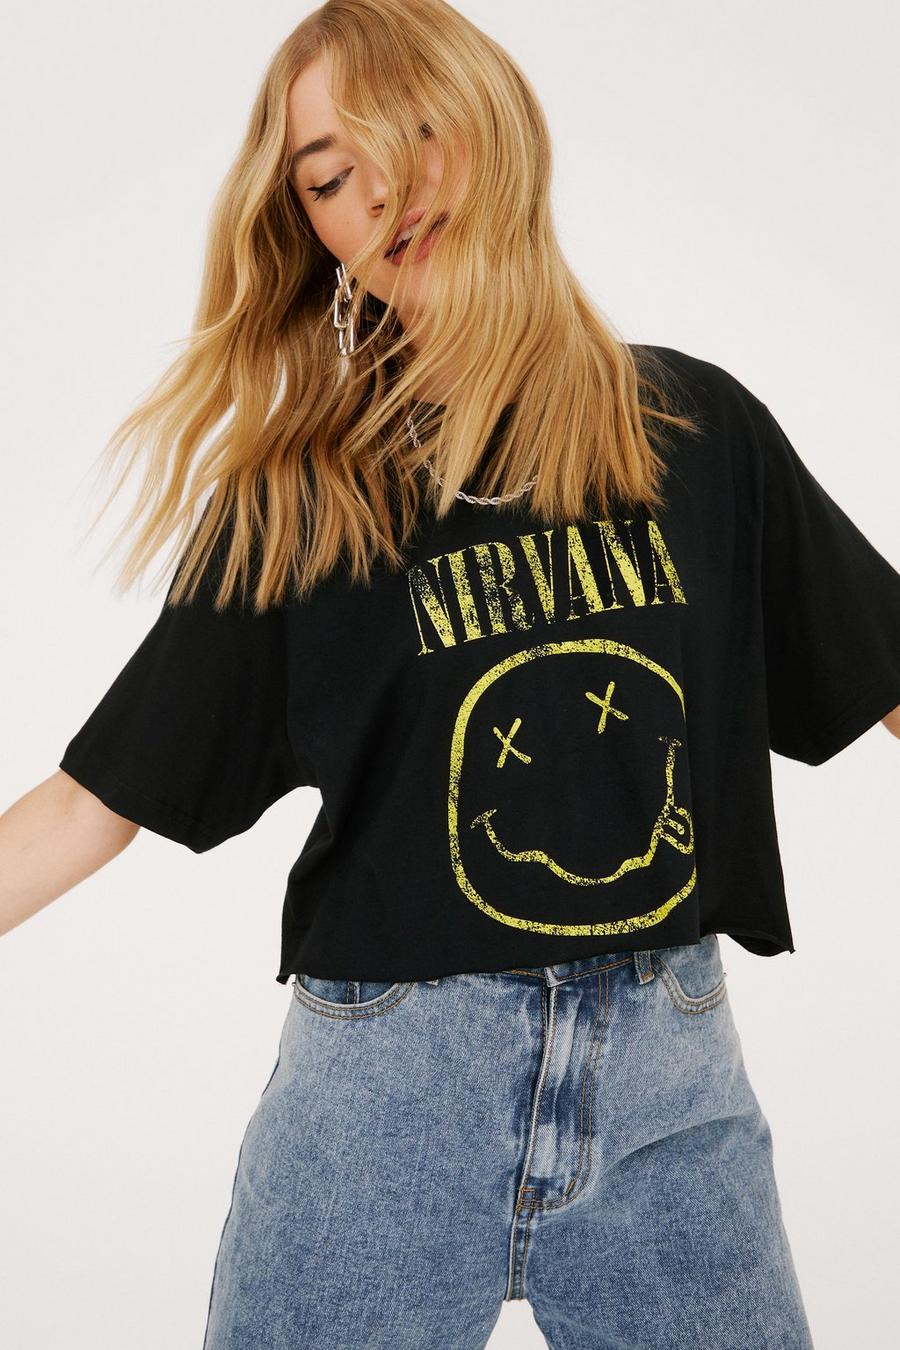 Nirvana Smiley Face Cropped Graphic T-Shirt